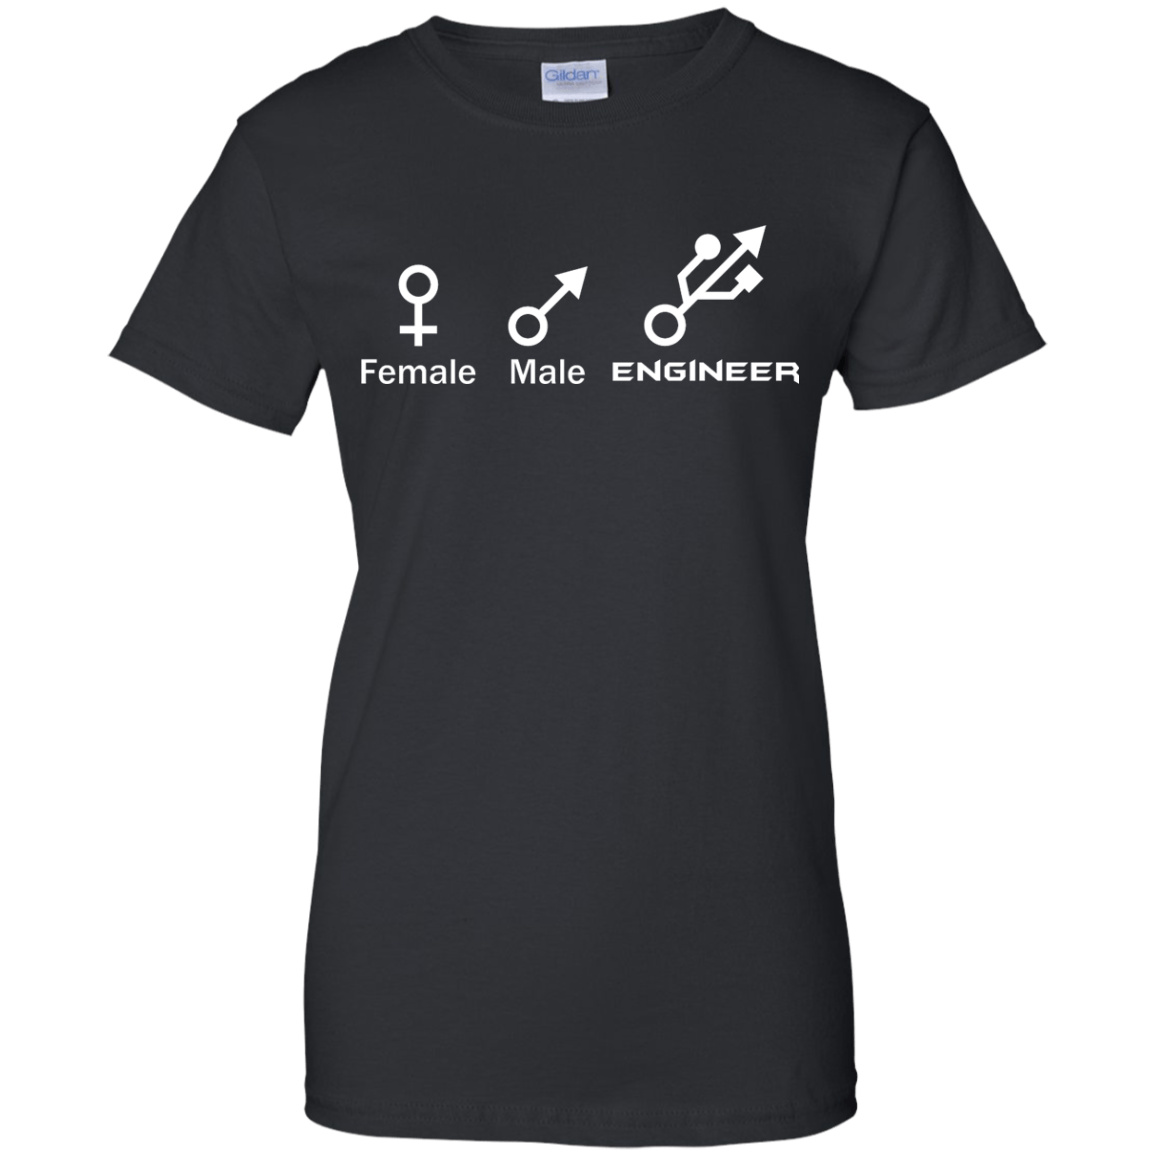 Female, Male, Engineer Symbols - Engineering Outfitters